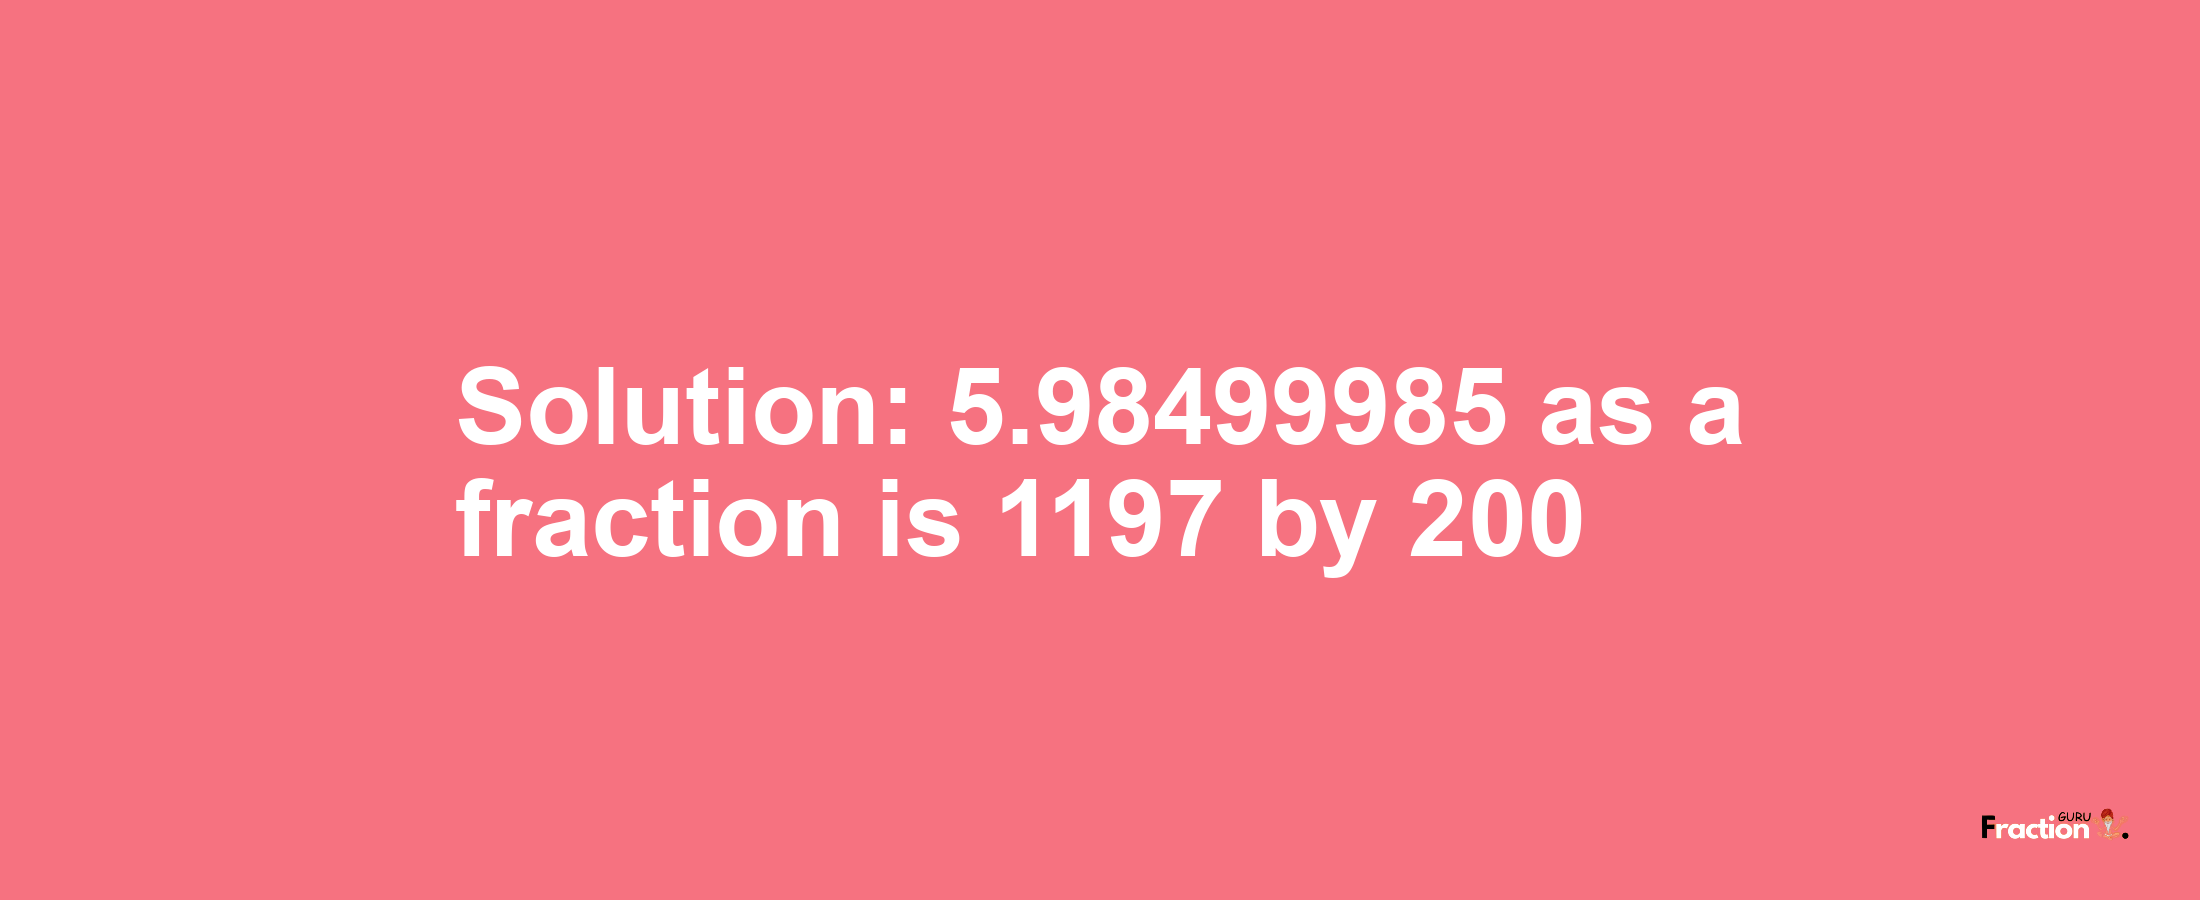 Solution:5.98499985 as a fraction is 1197/200